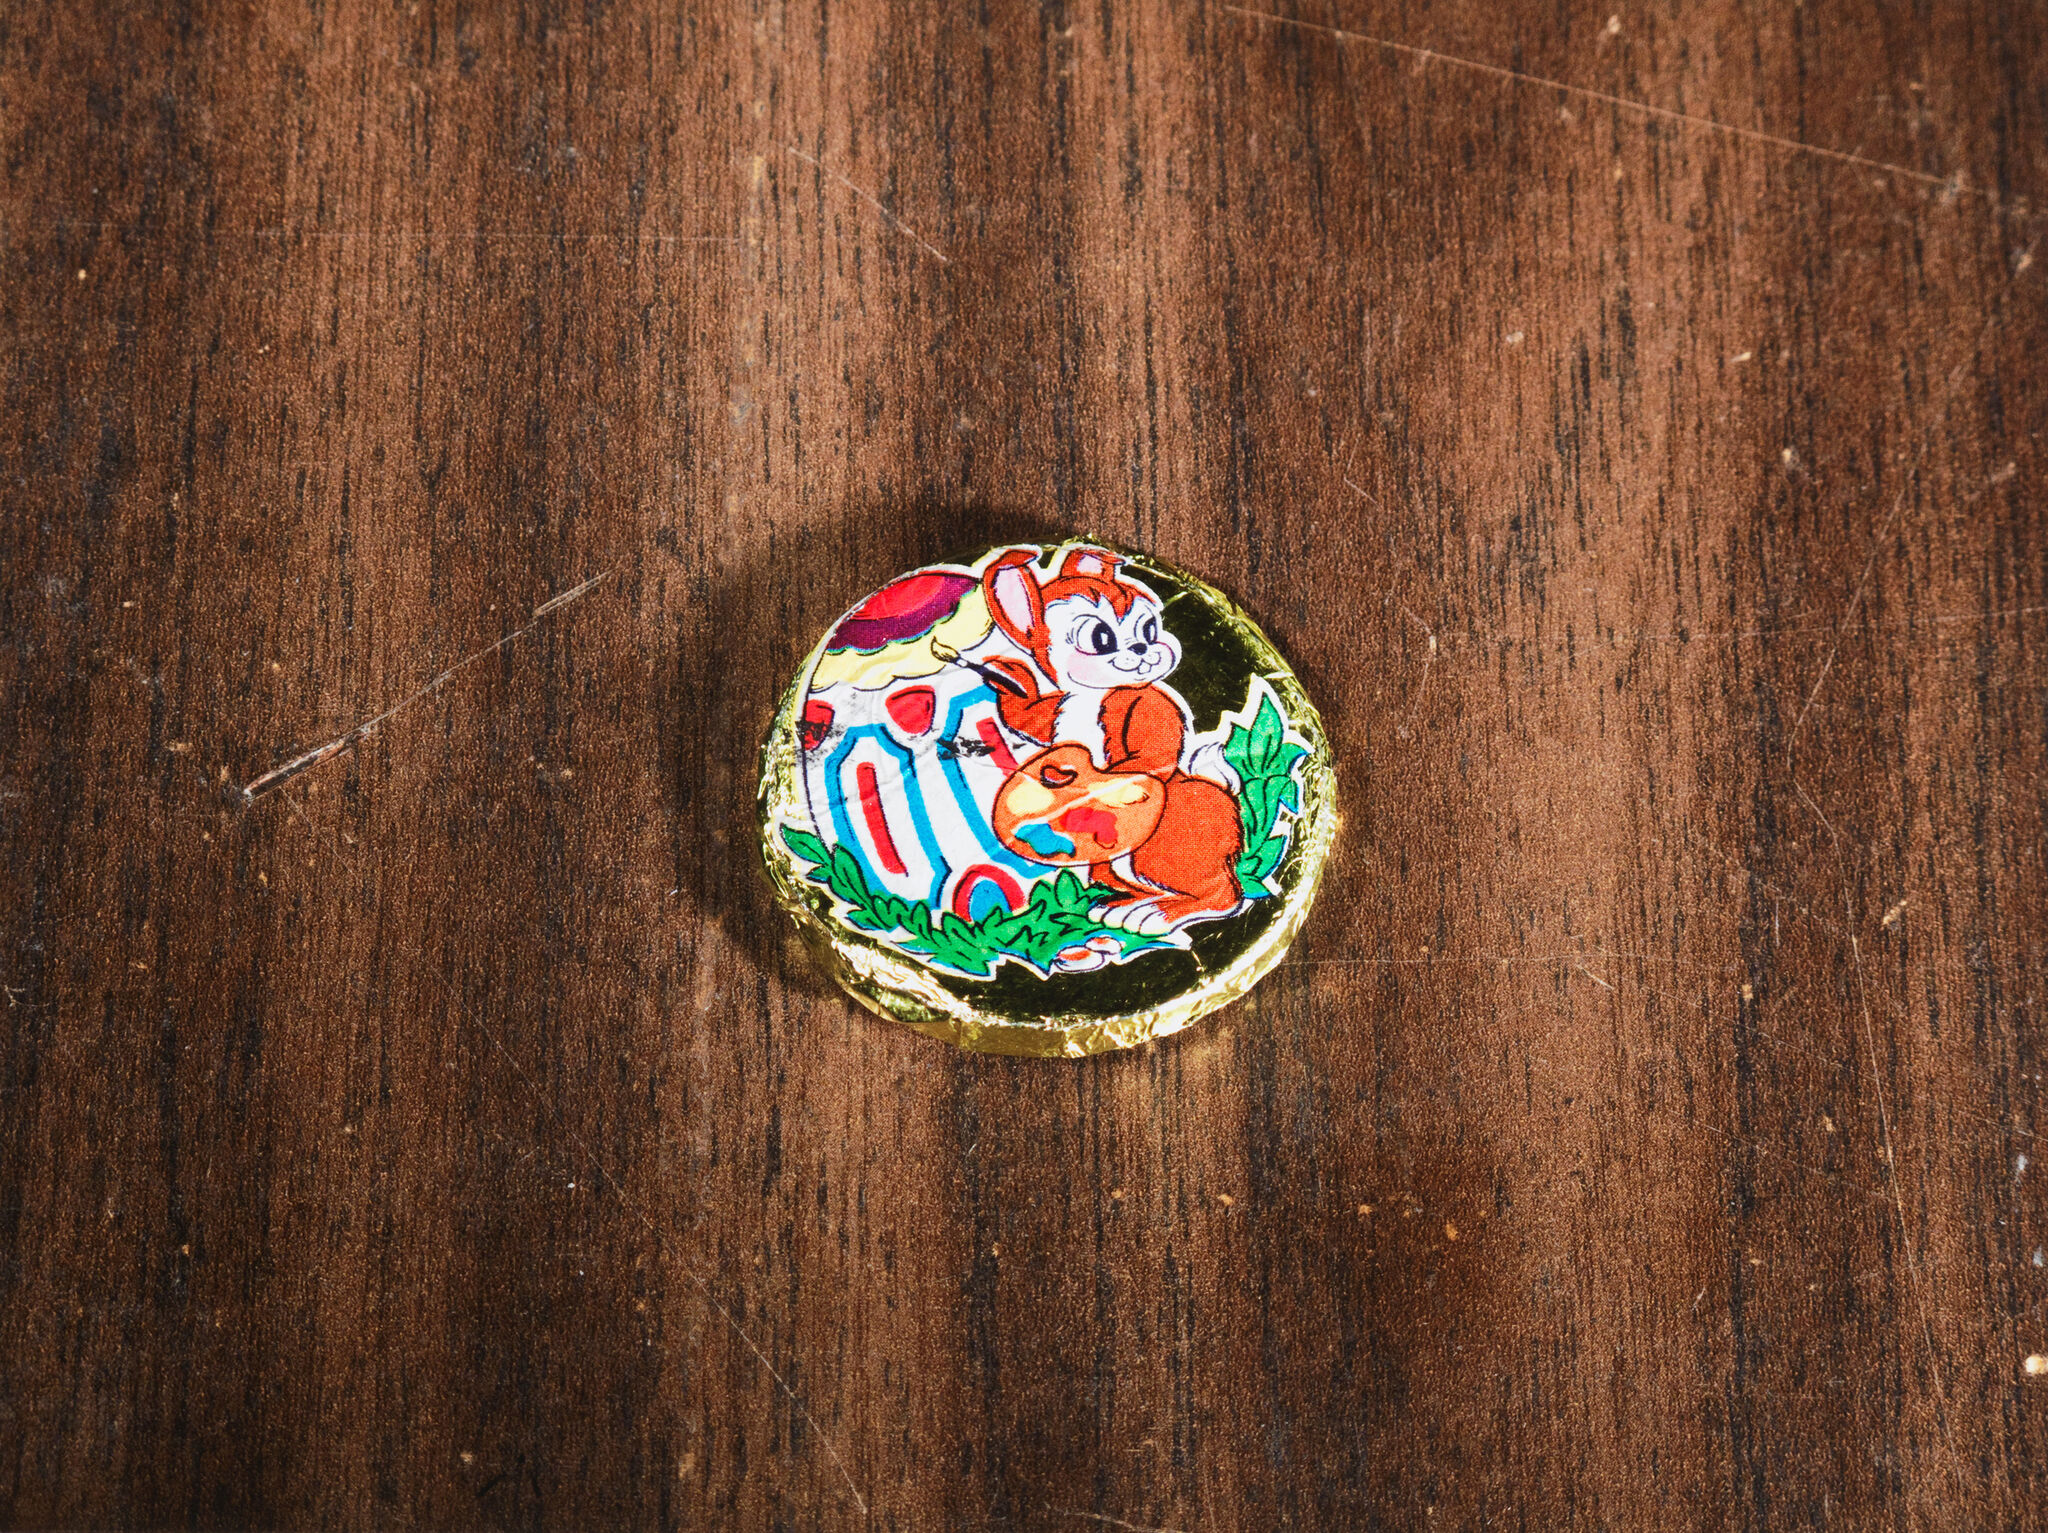 A photograph of something circular and flat lying on a wood table. The item is covered in gold foil printed with a colorful cartoon of a rabbit painting.